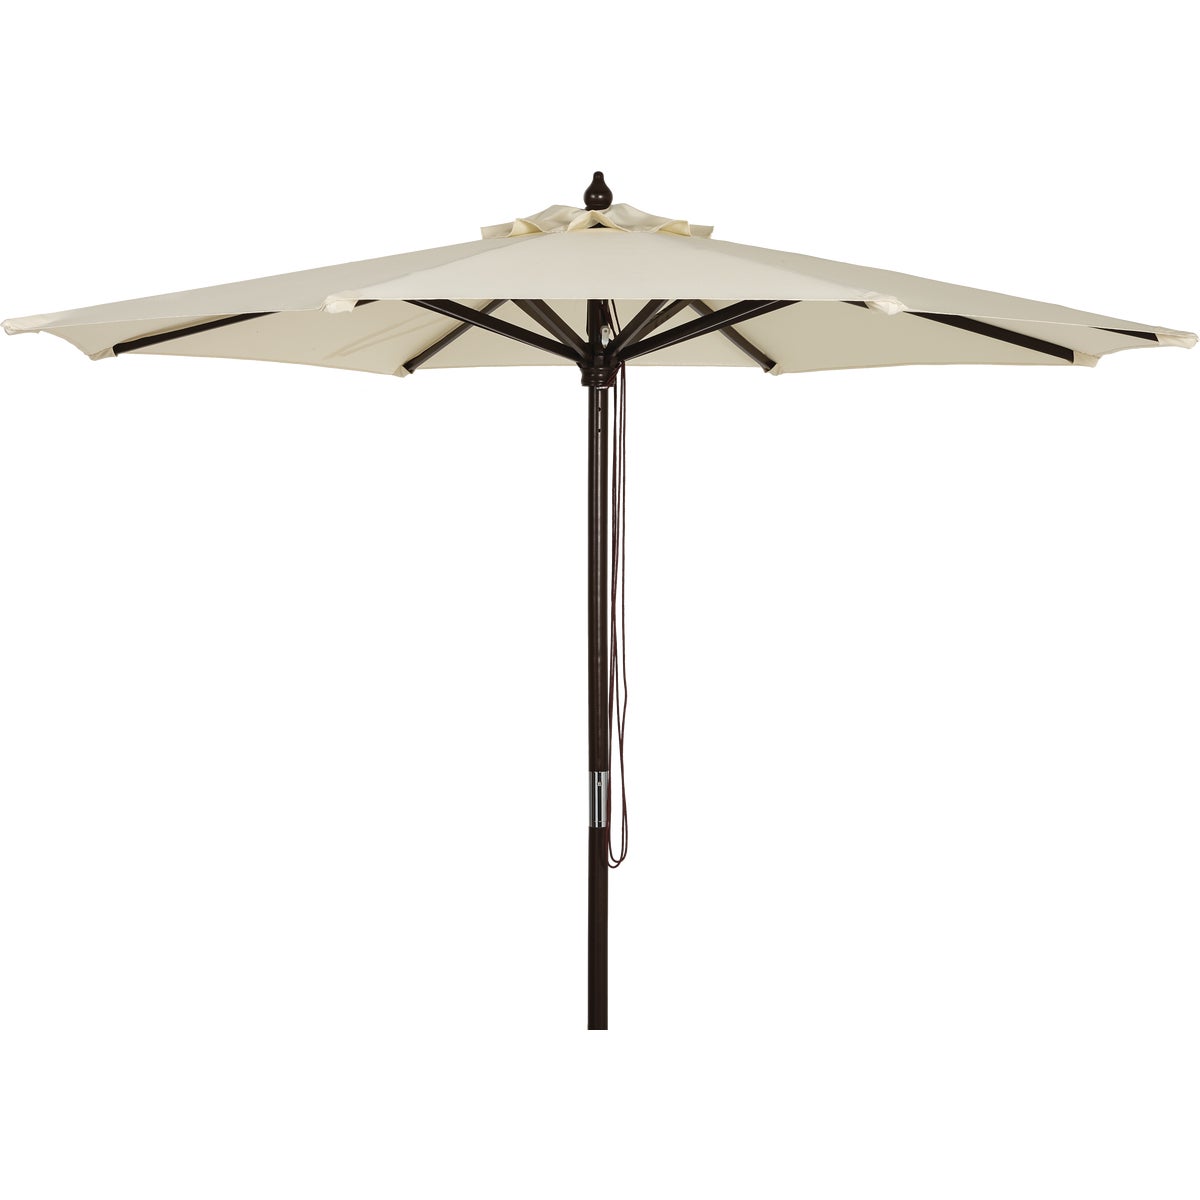 Outdoor Expressions 9 Ft. Pulley Cream Market Patio Umbrella with Chrome Plated Hardware